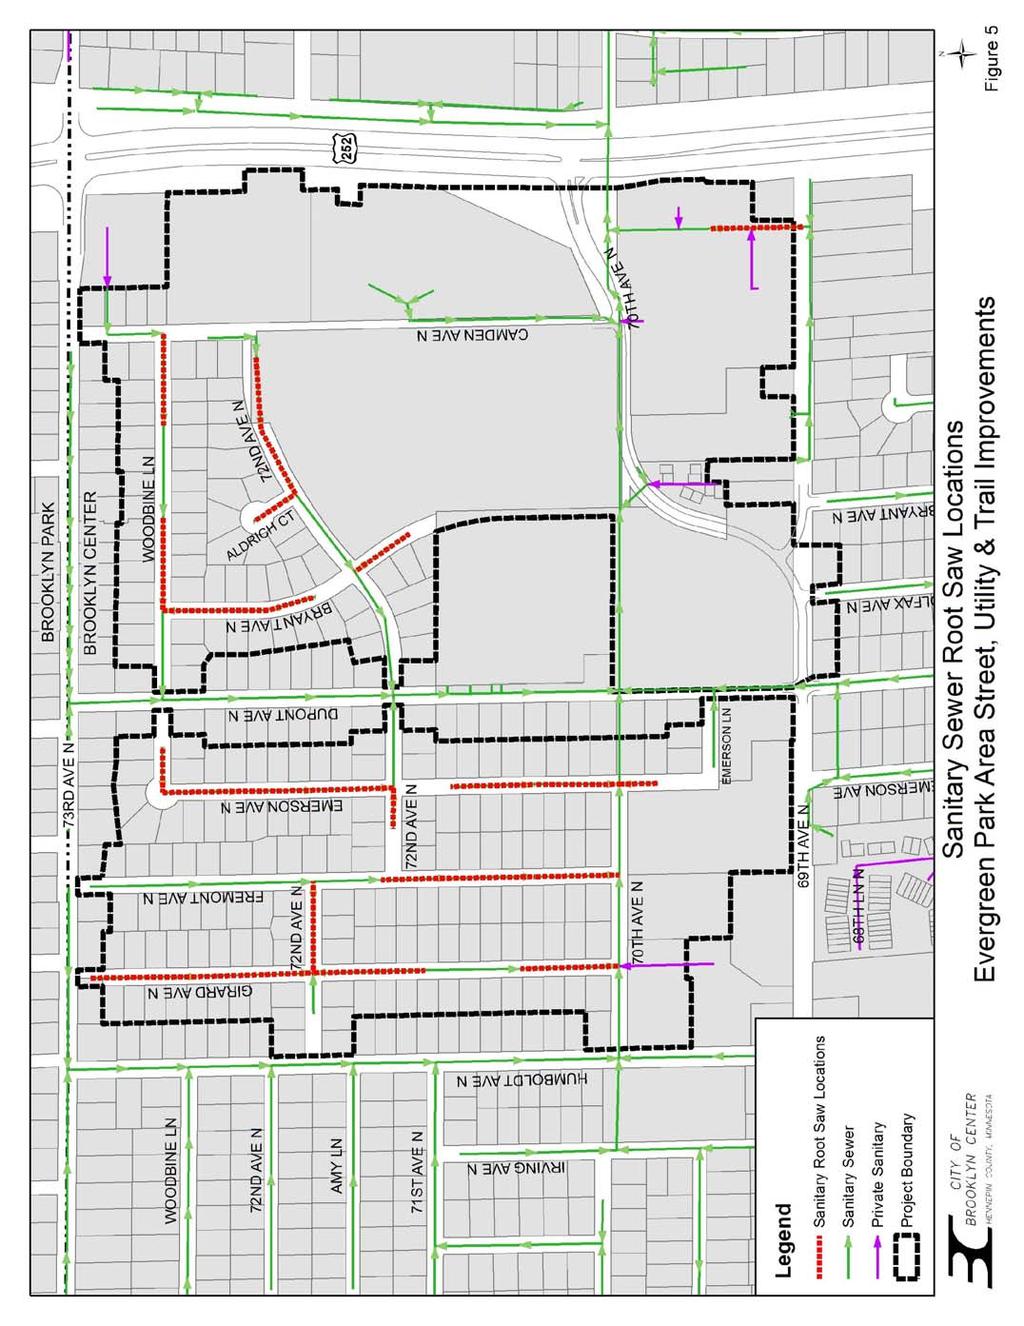 Figure 5: Sanitary Sewer Root Saw Locations Feasibility Report